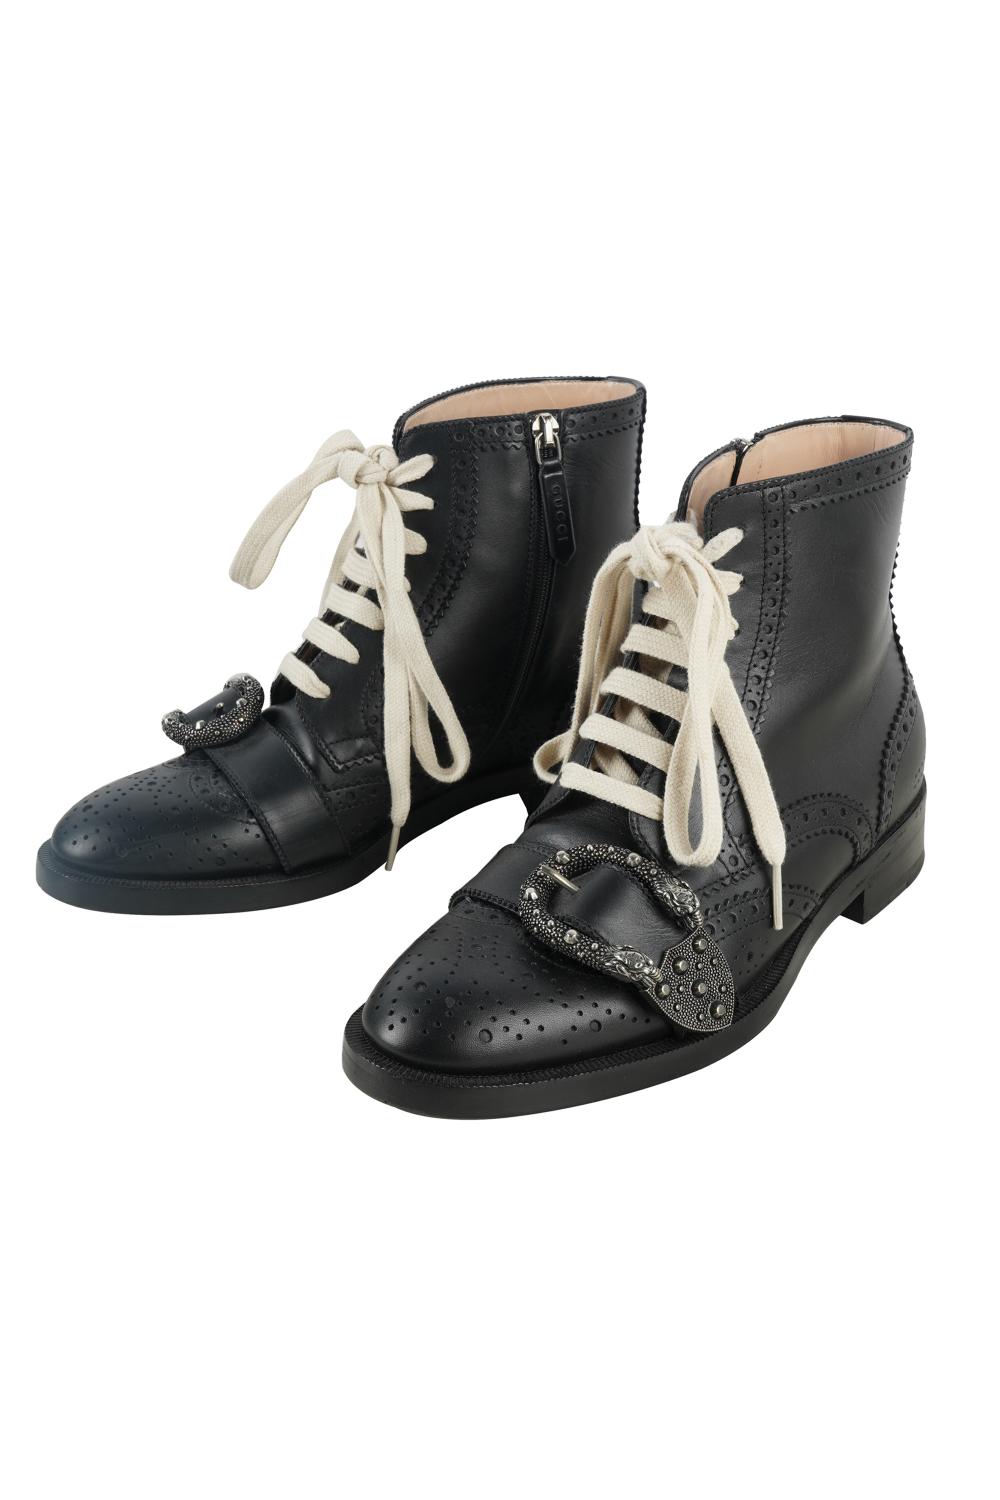 PAIR OF GUCCI LACE UP ANKLE BOOTSblack 332ffd